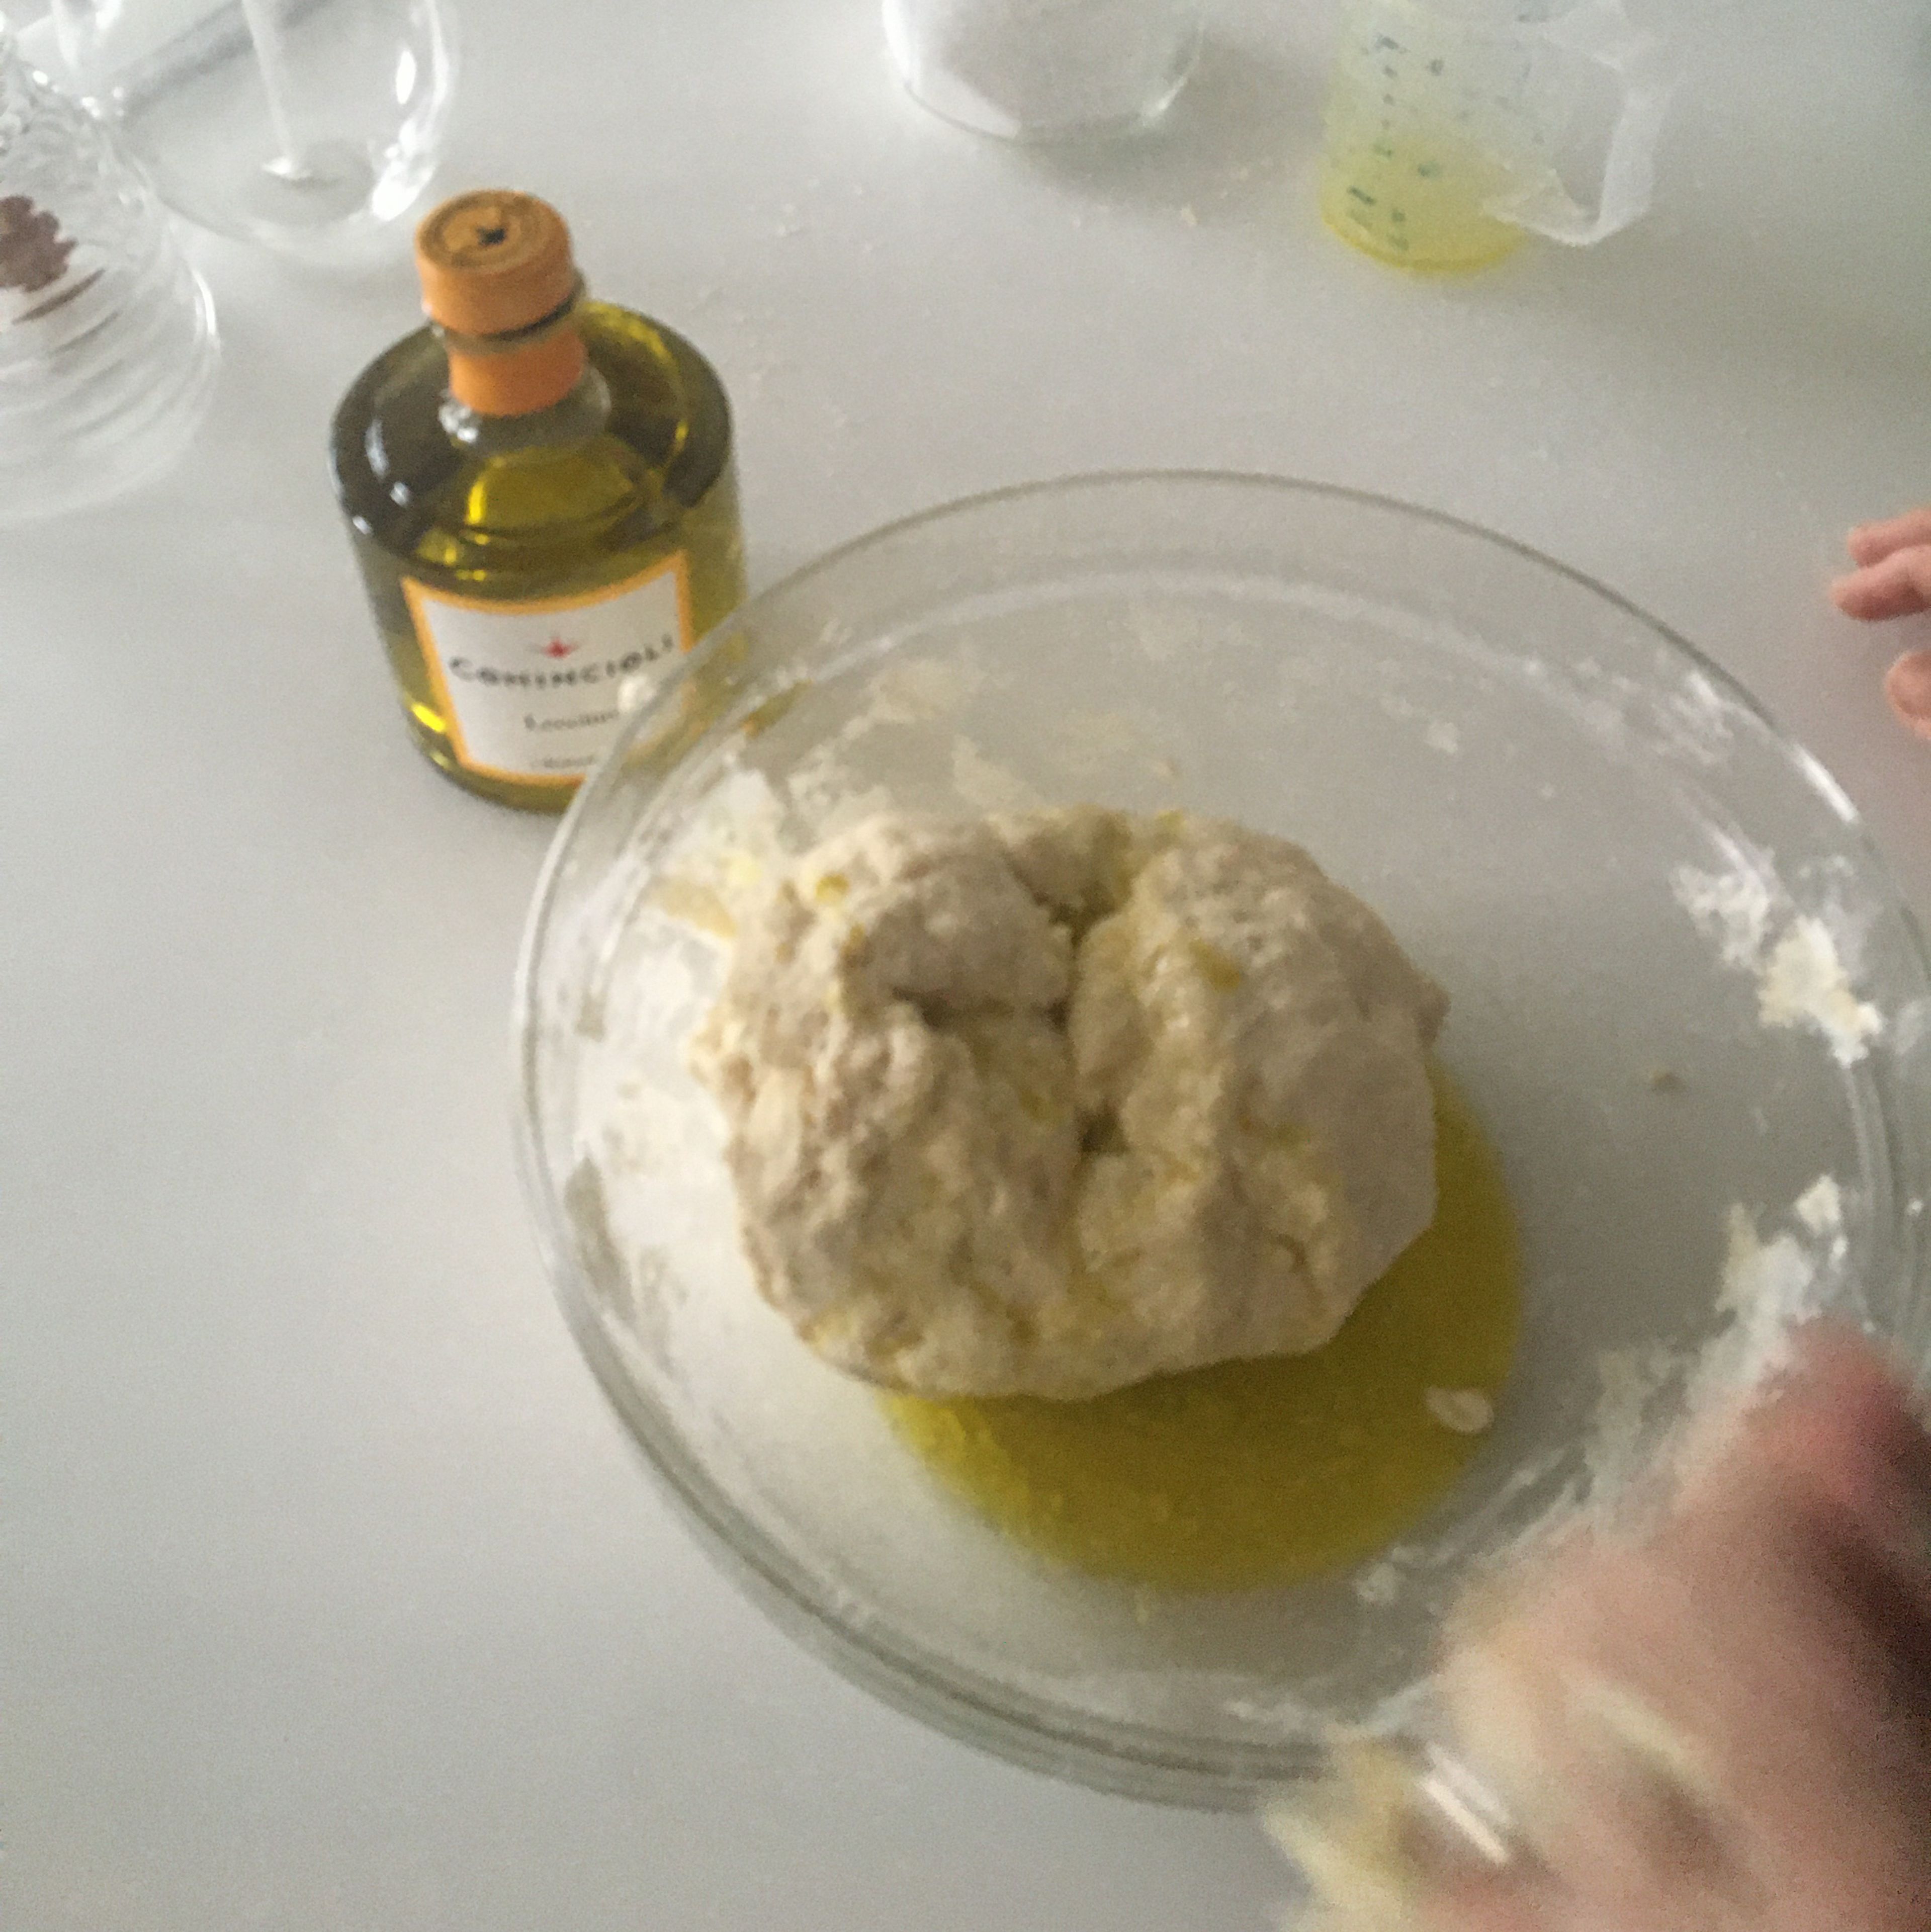 Put the dough back into the bowl and add your olive oil to the mixture